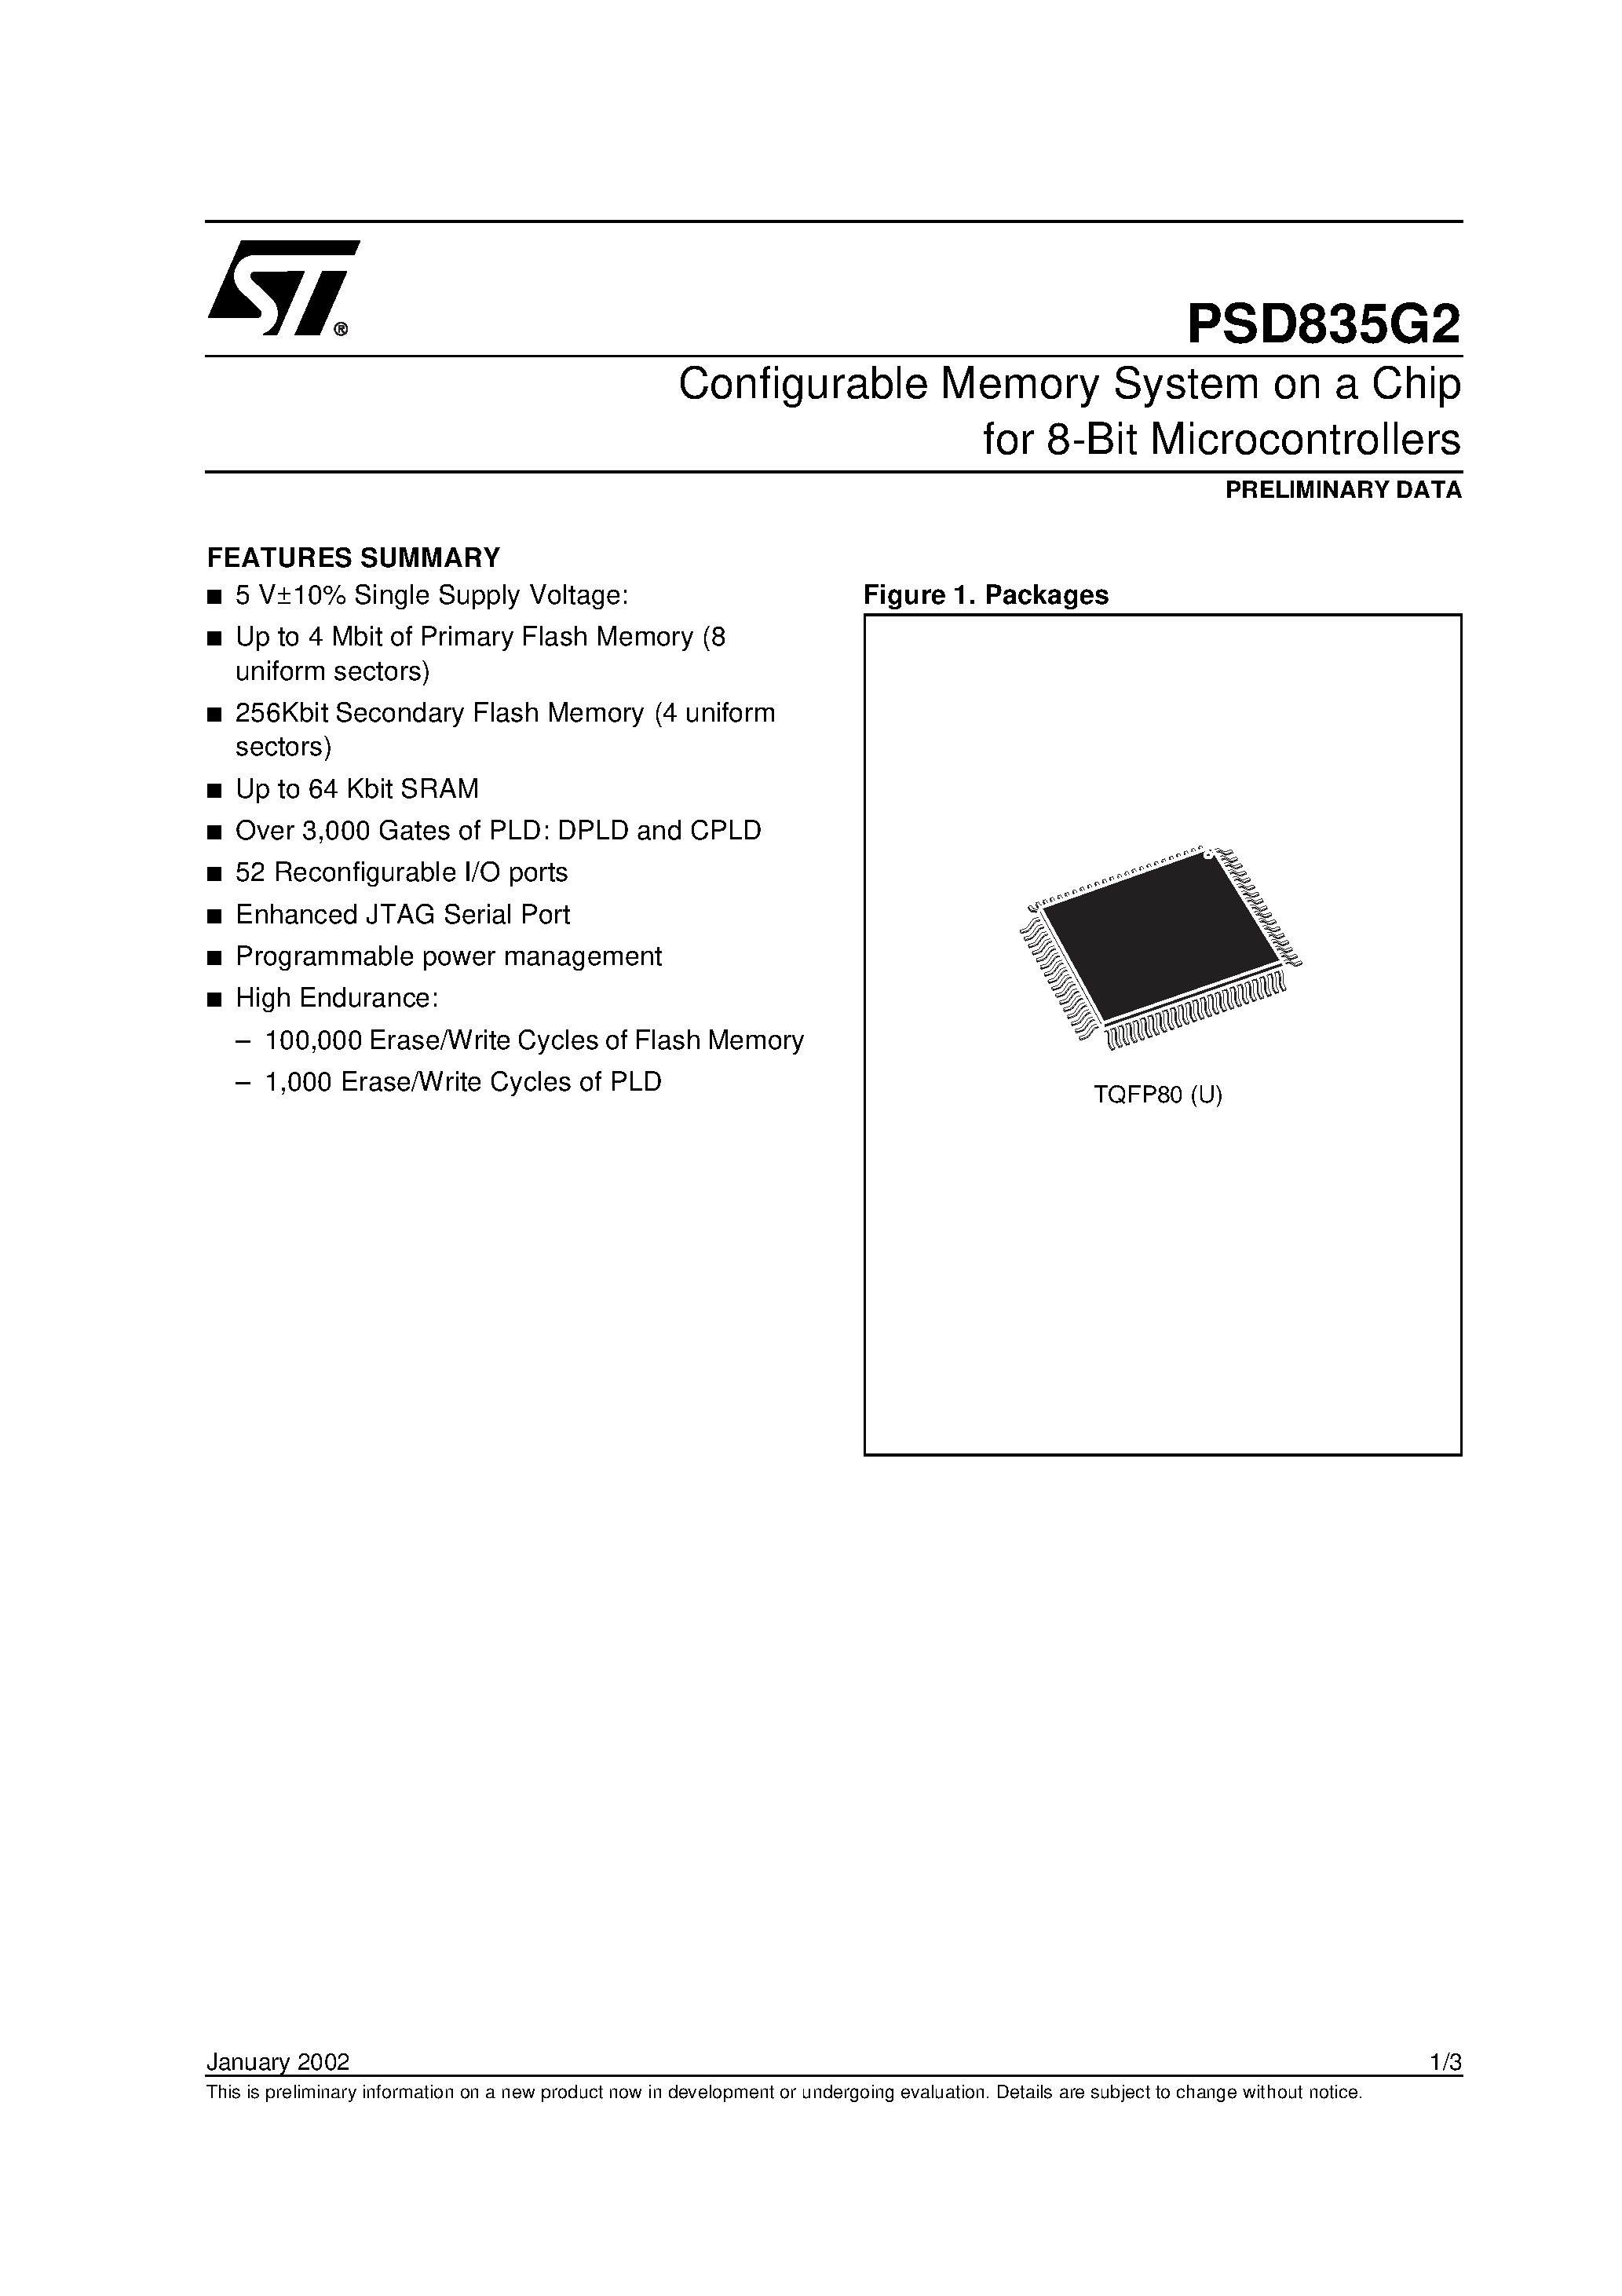 Datasheet PSD835F2V-A-90MI - Configurable Memory System on a Chip for 8-Bit Microcontrollers page 1